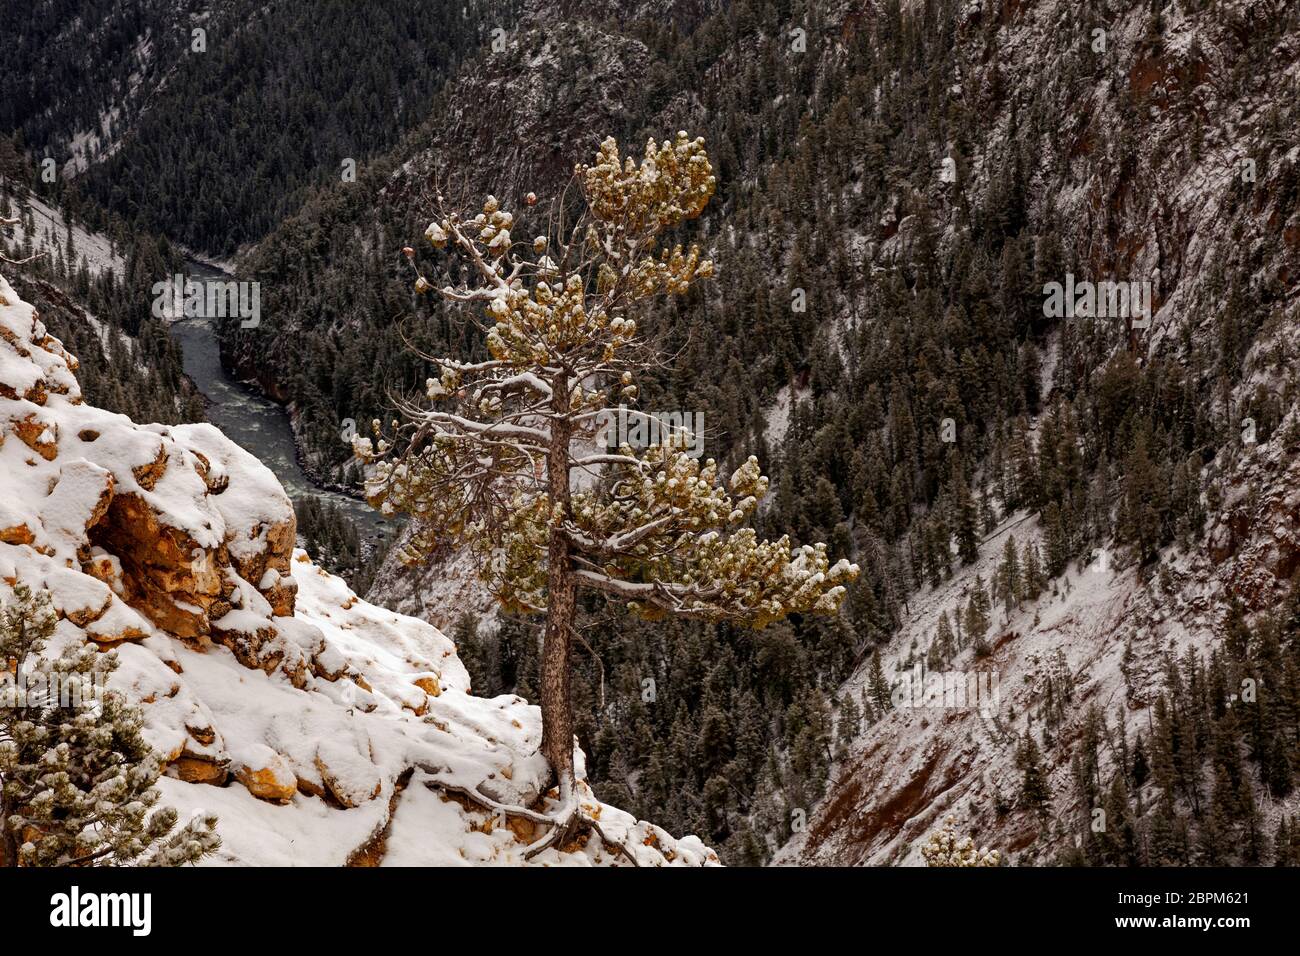 WY04409-00....WYOMING - Pine tree delicately balanced on the edge of the Grand Canyon of the Yellowstone River in Yellowstone National Park. Stock Photo